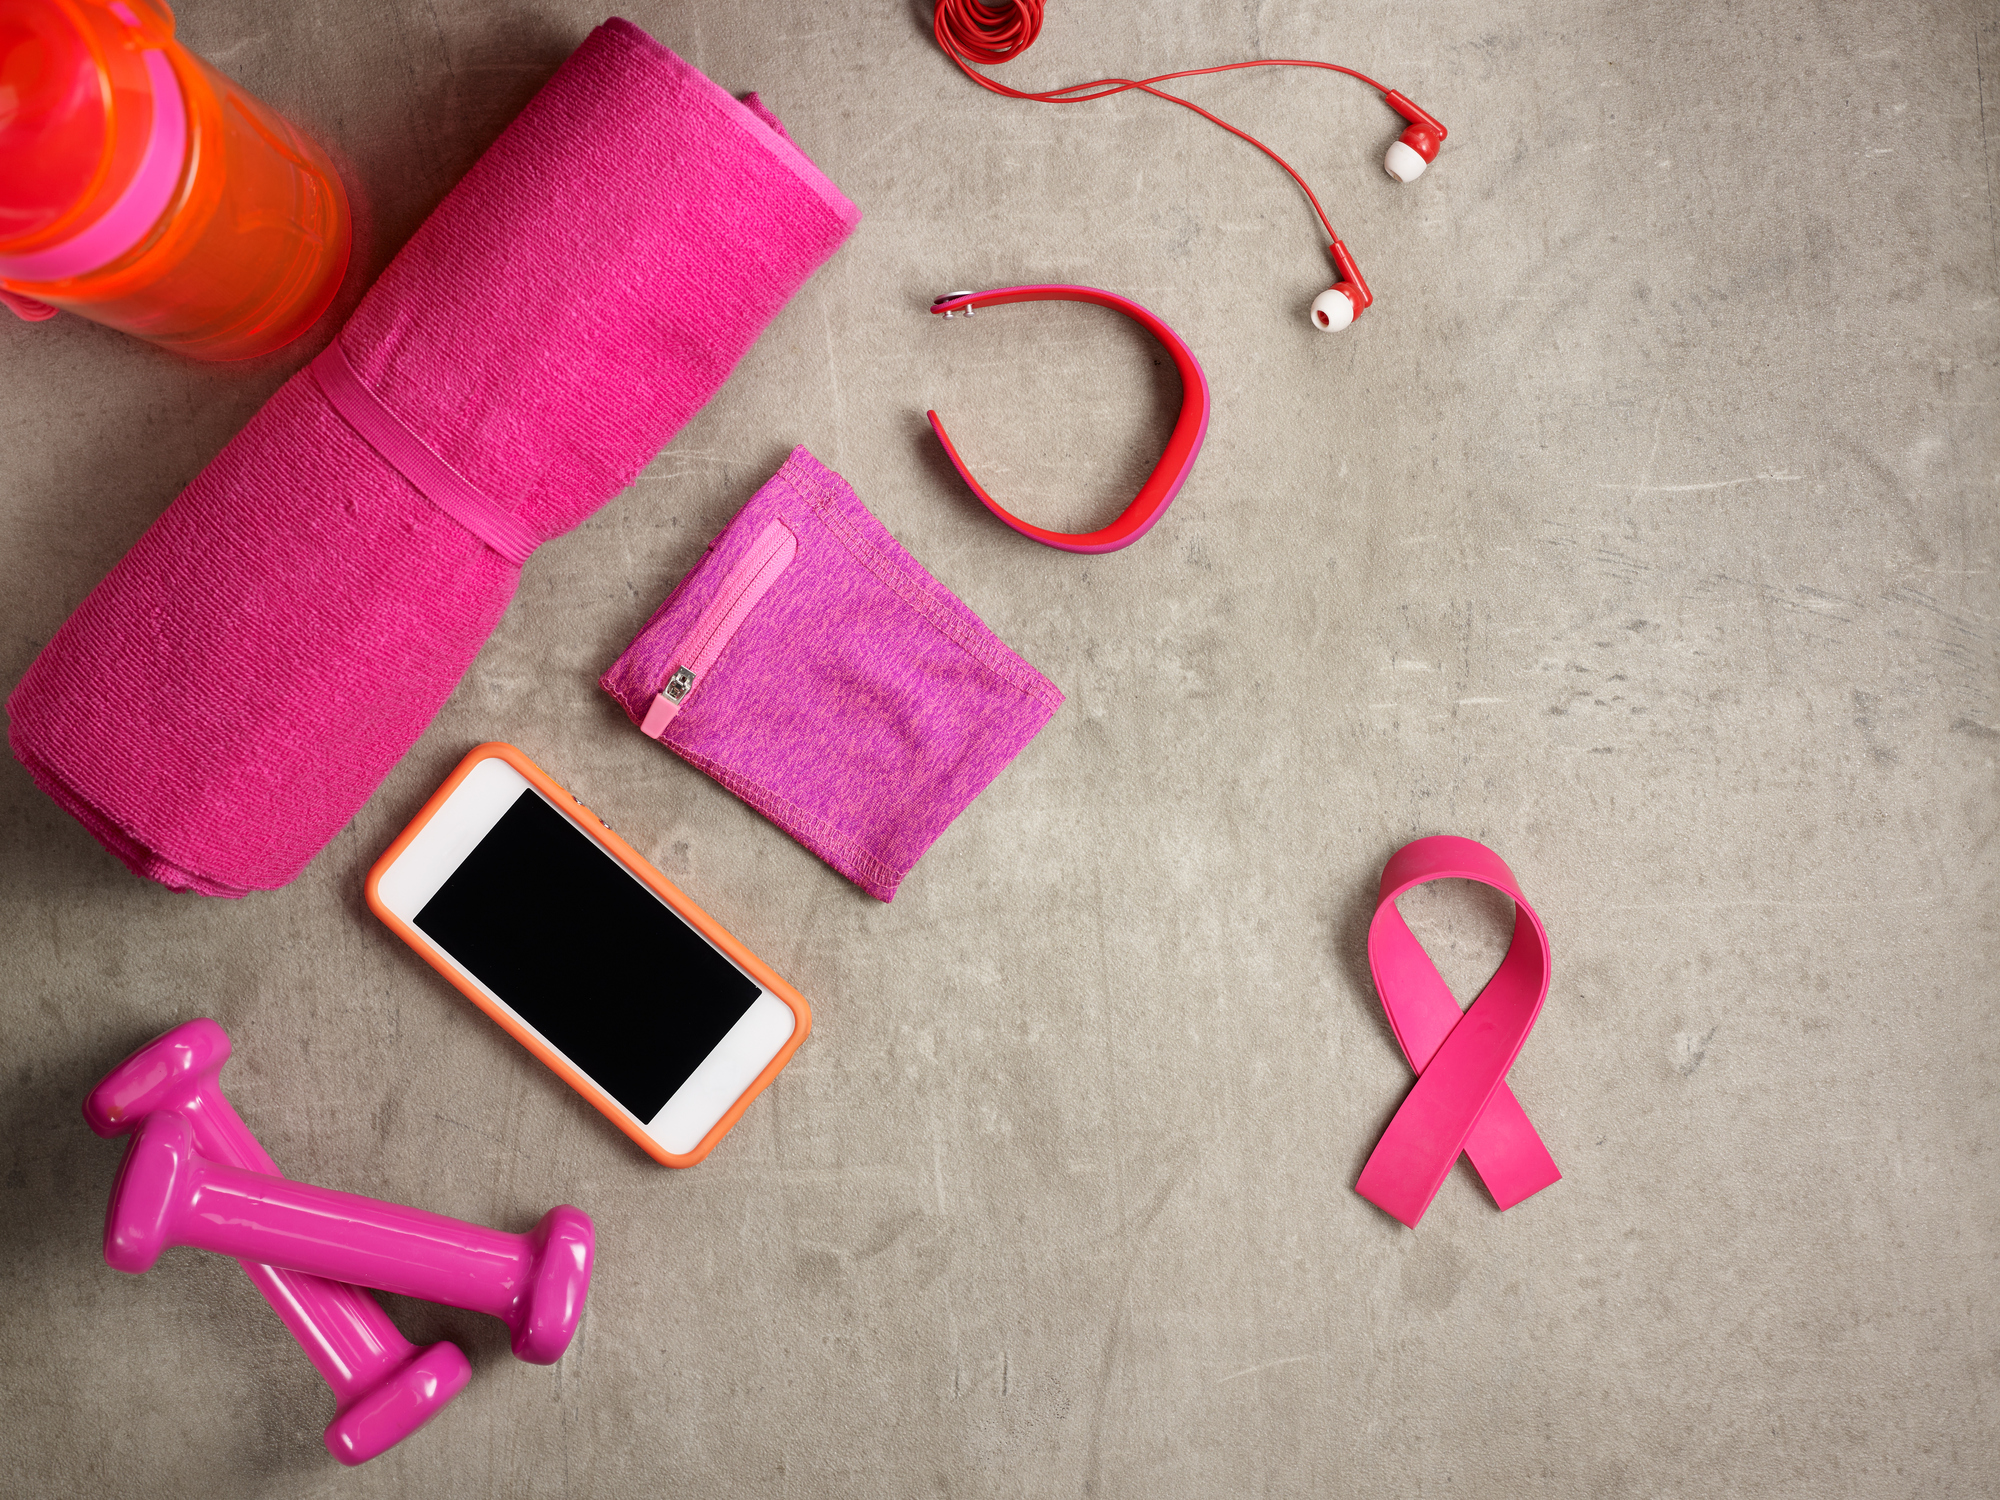 5 ways exercise helps battle breast cancer